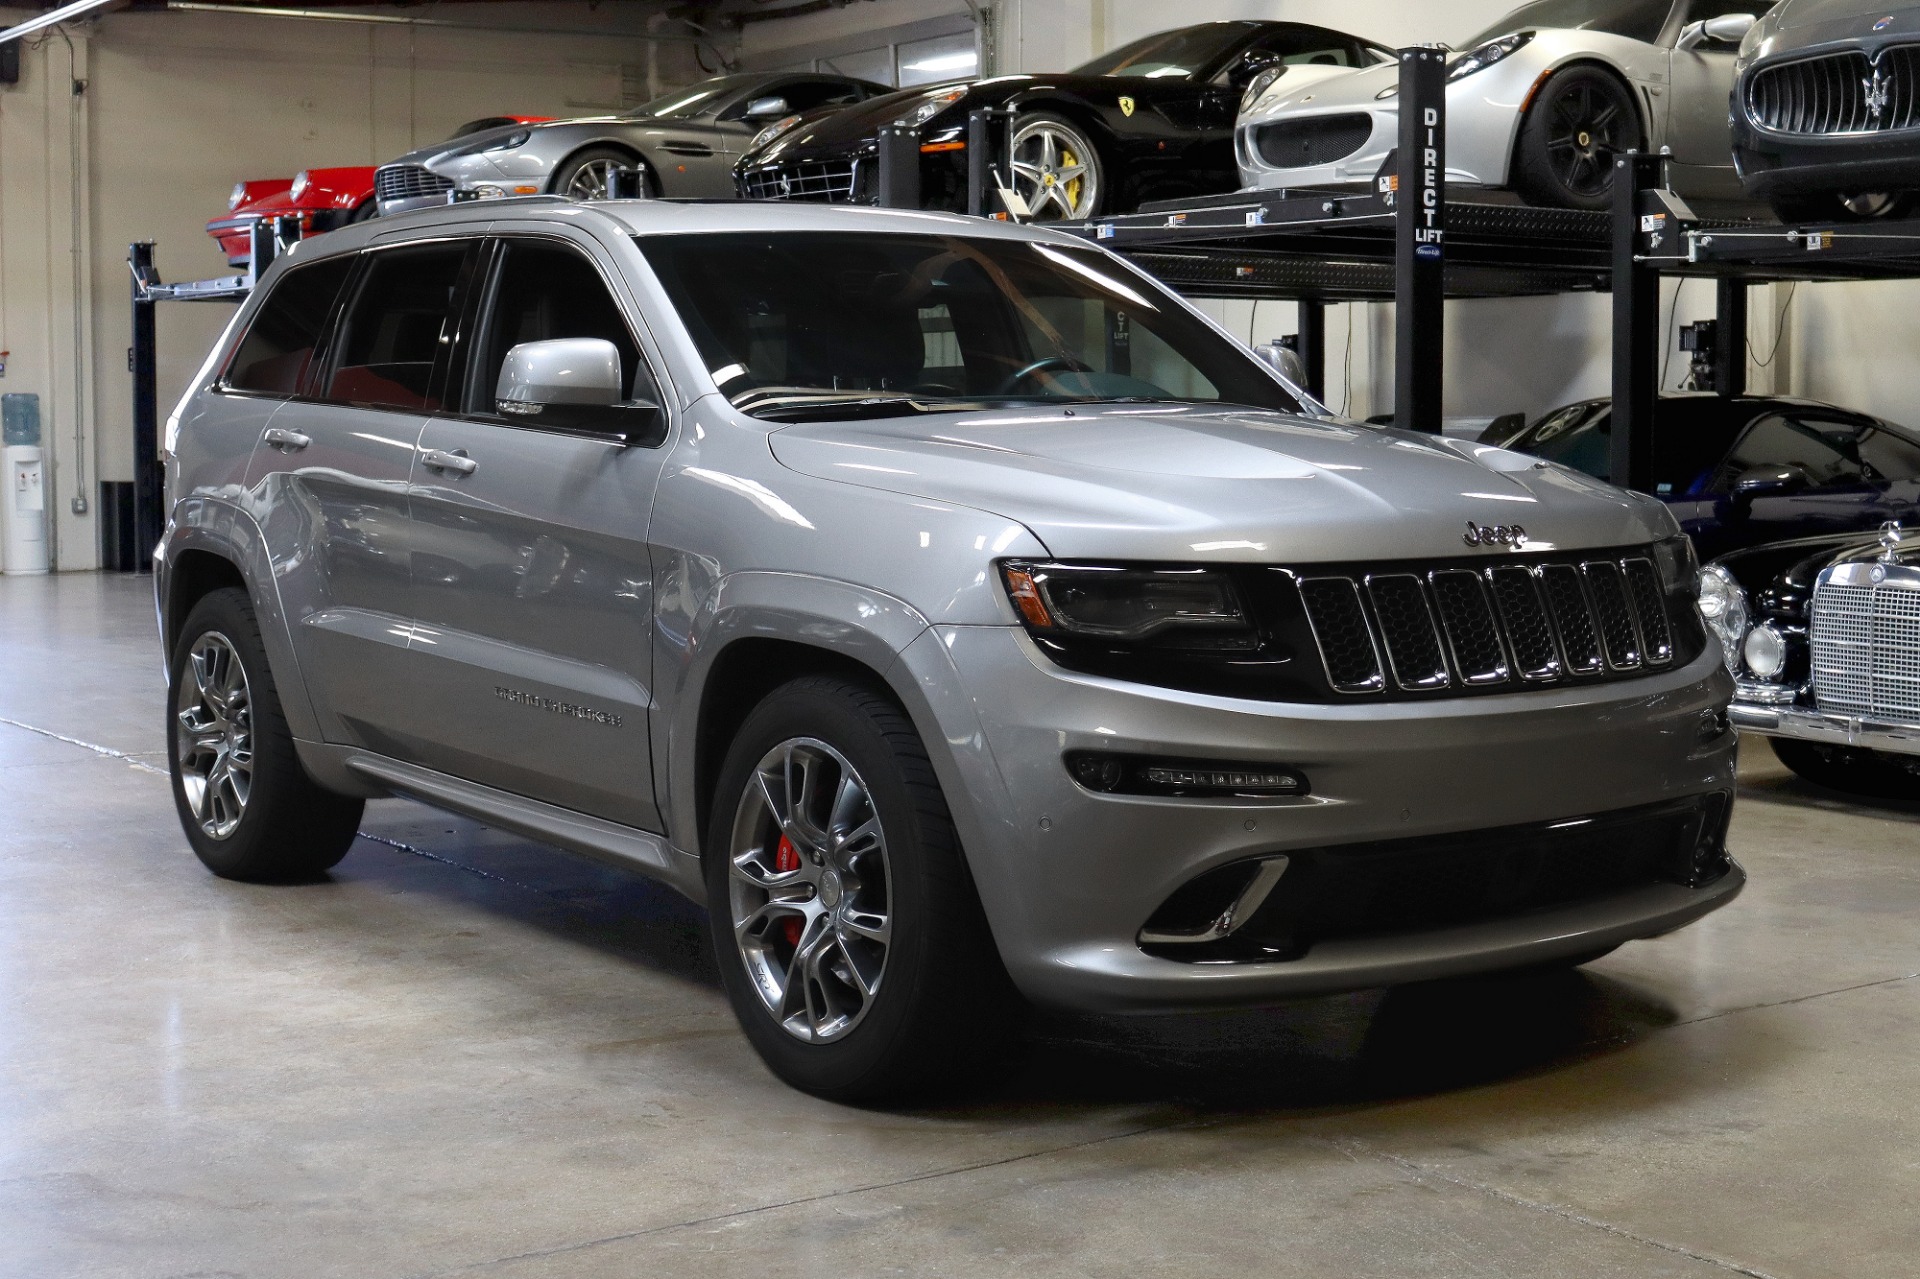 Used 2015 Jeep Grand Cherokee SRT for sale $52,995 at San Francisco Sports Cars in San Carlos CA 94070 1